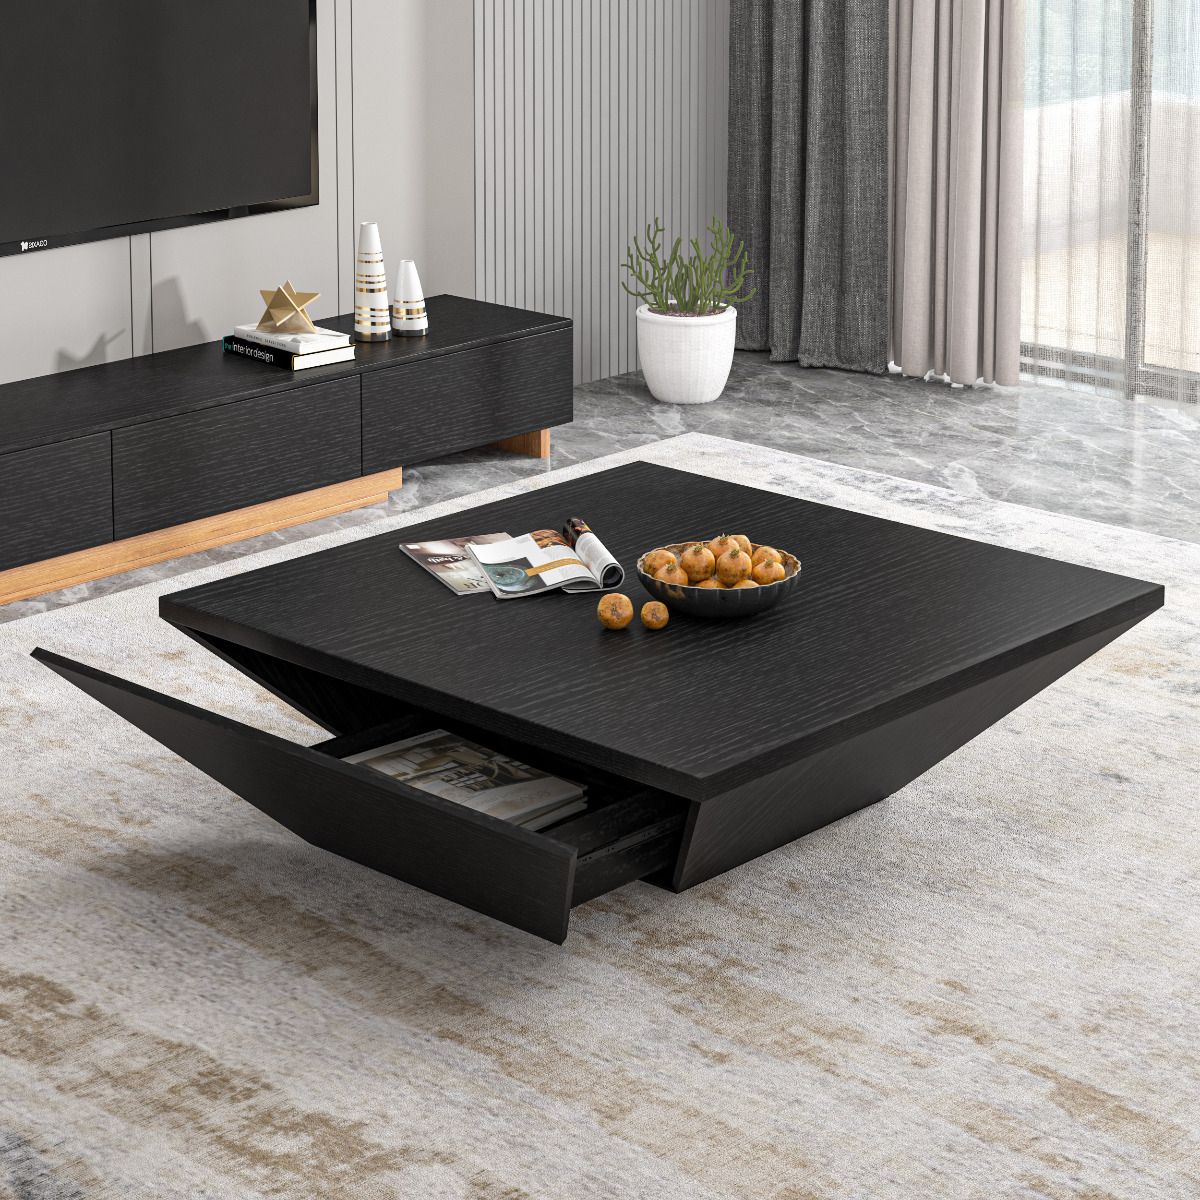 2020 Black Square Coffee Tables Within Modern Black Wooden Coffee Table (View 4 of 20)